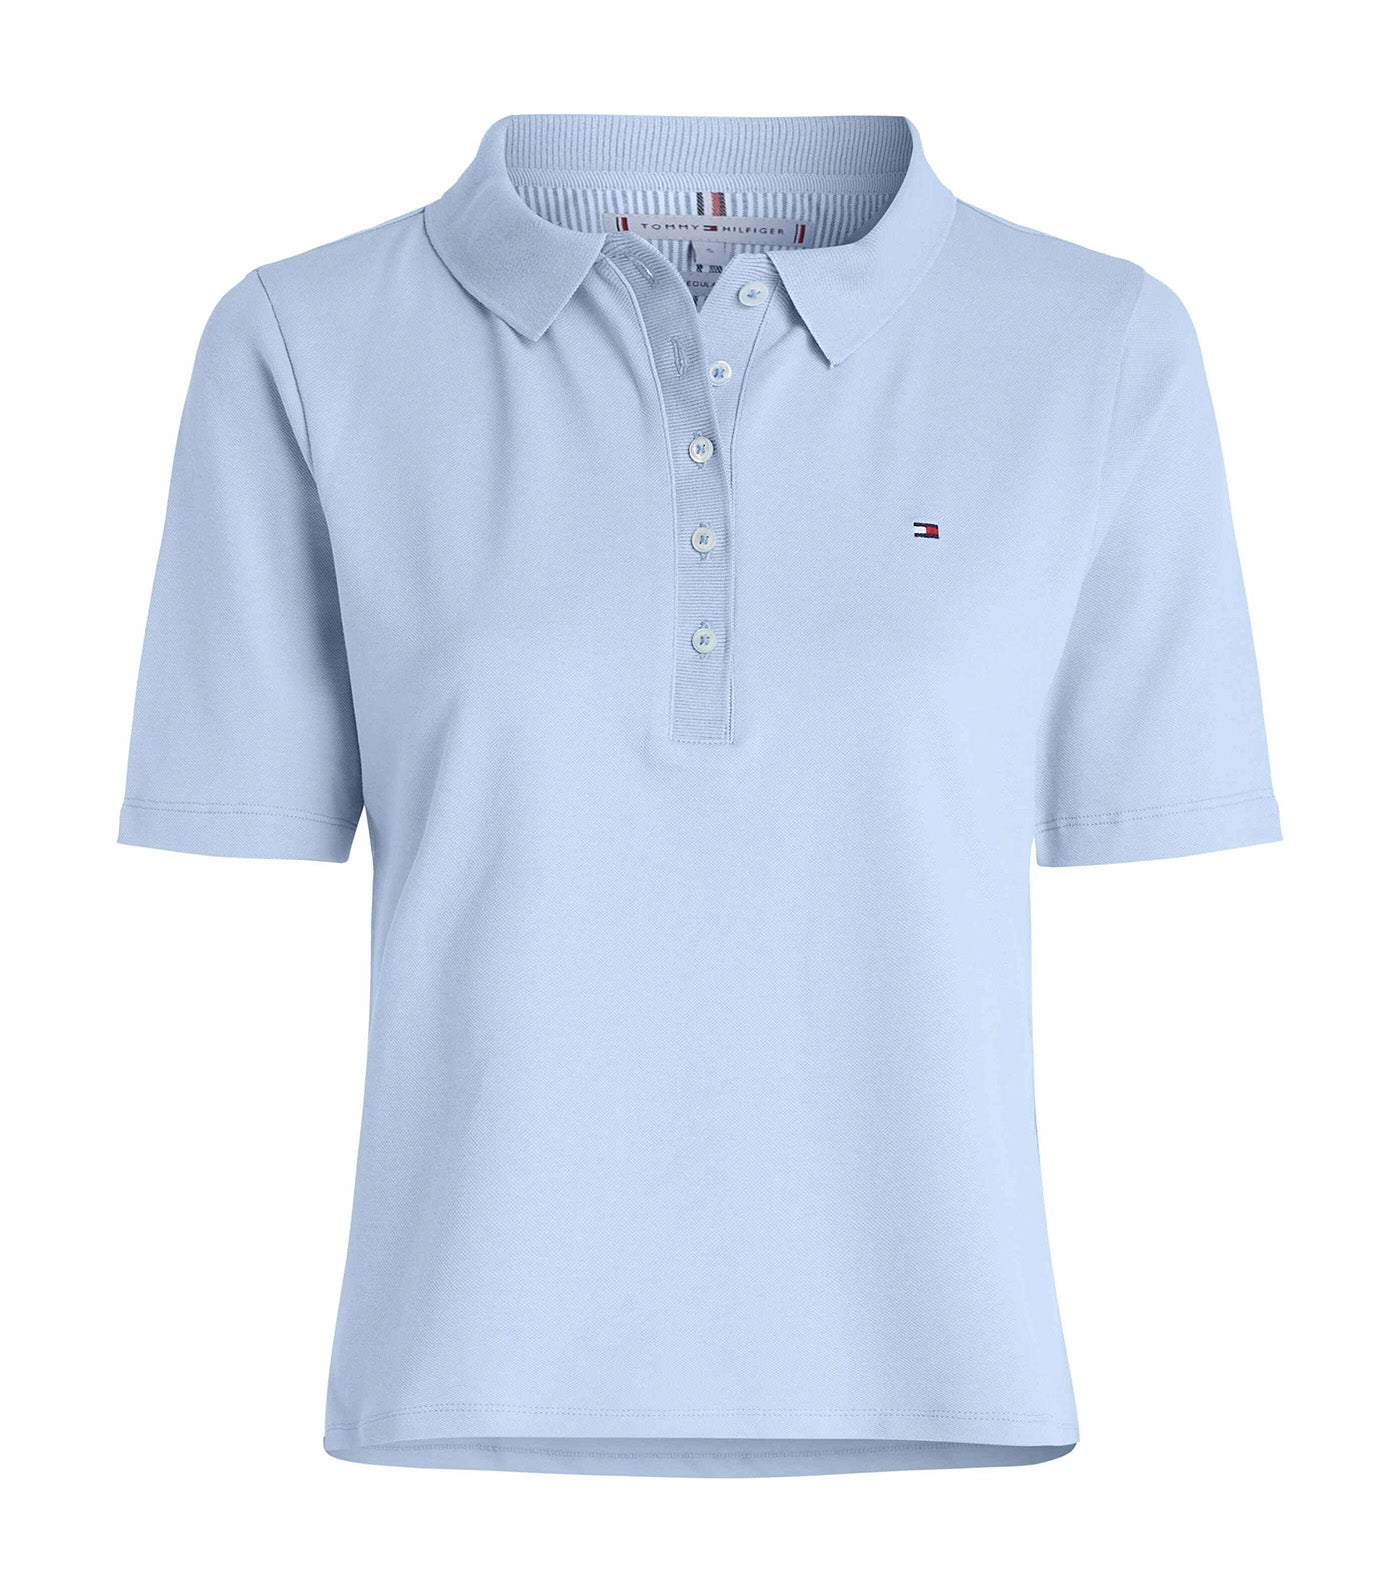 Women's 1985 Slim Pique Polo Well Water